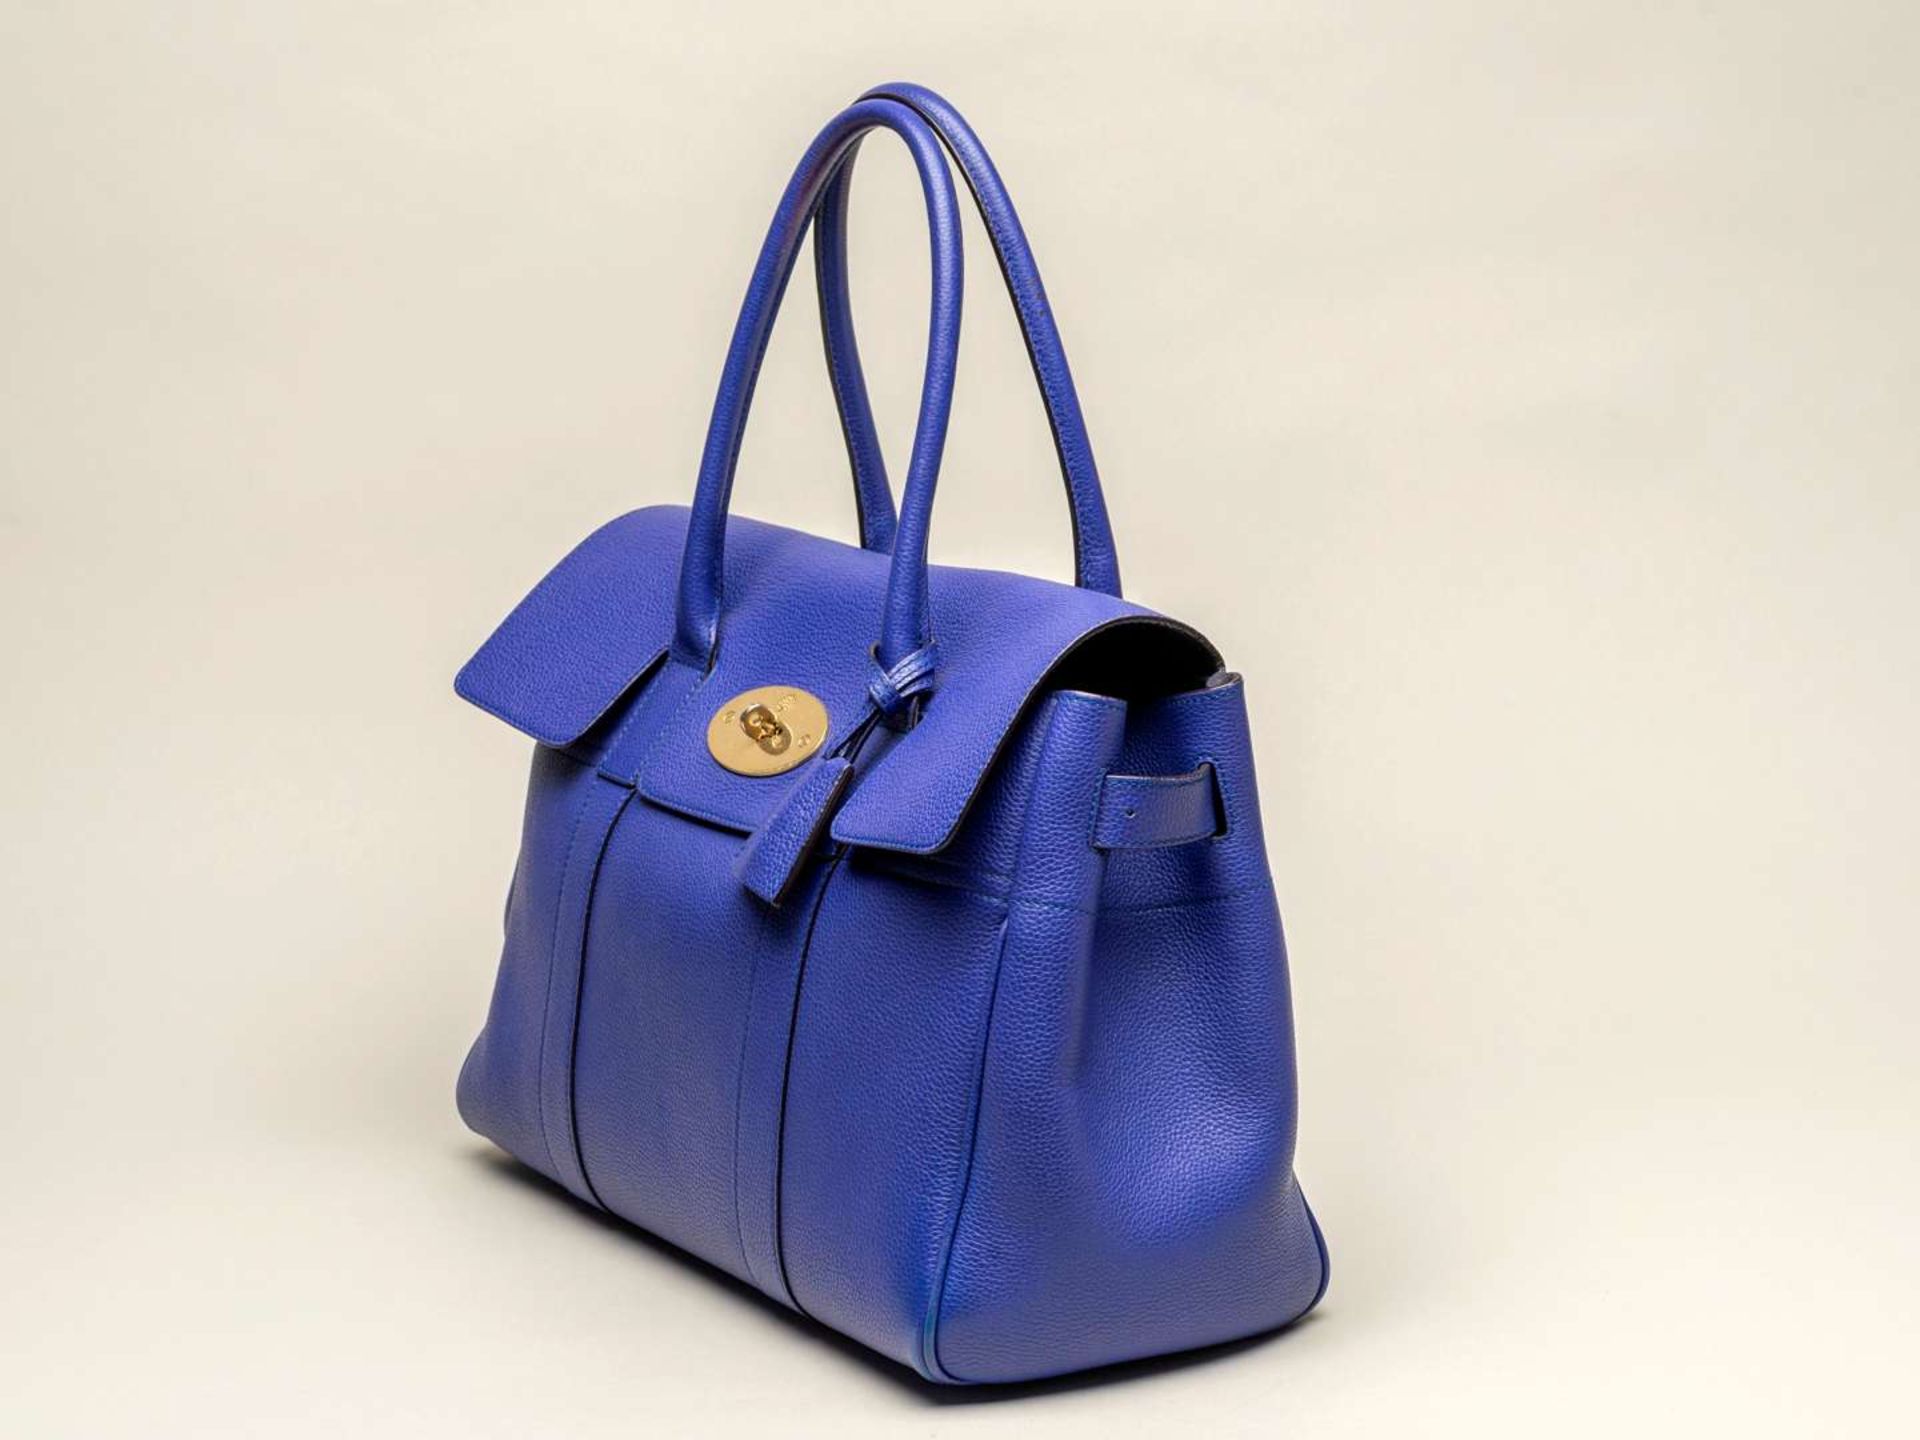 MULBERRY, a Baywaters leather handbag - Image 2 of 8